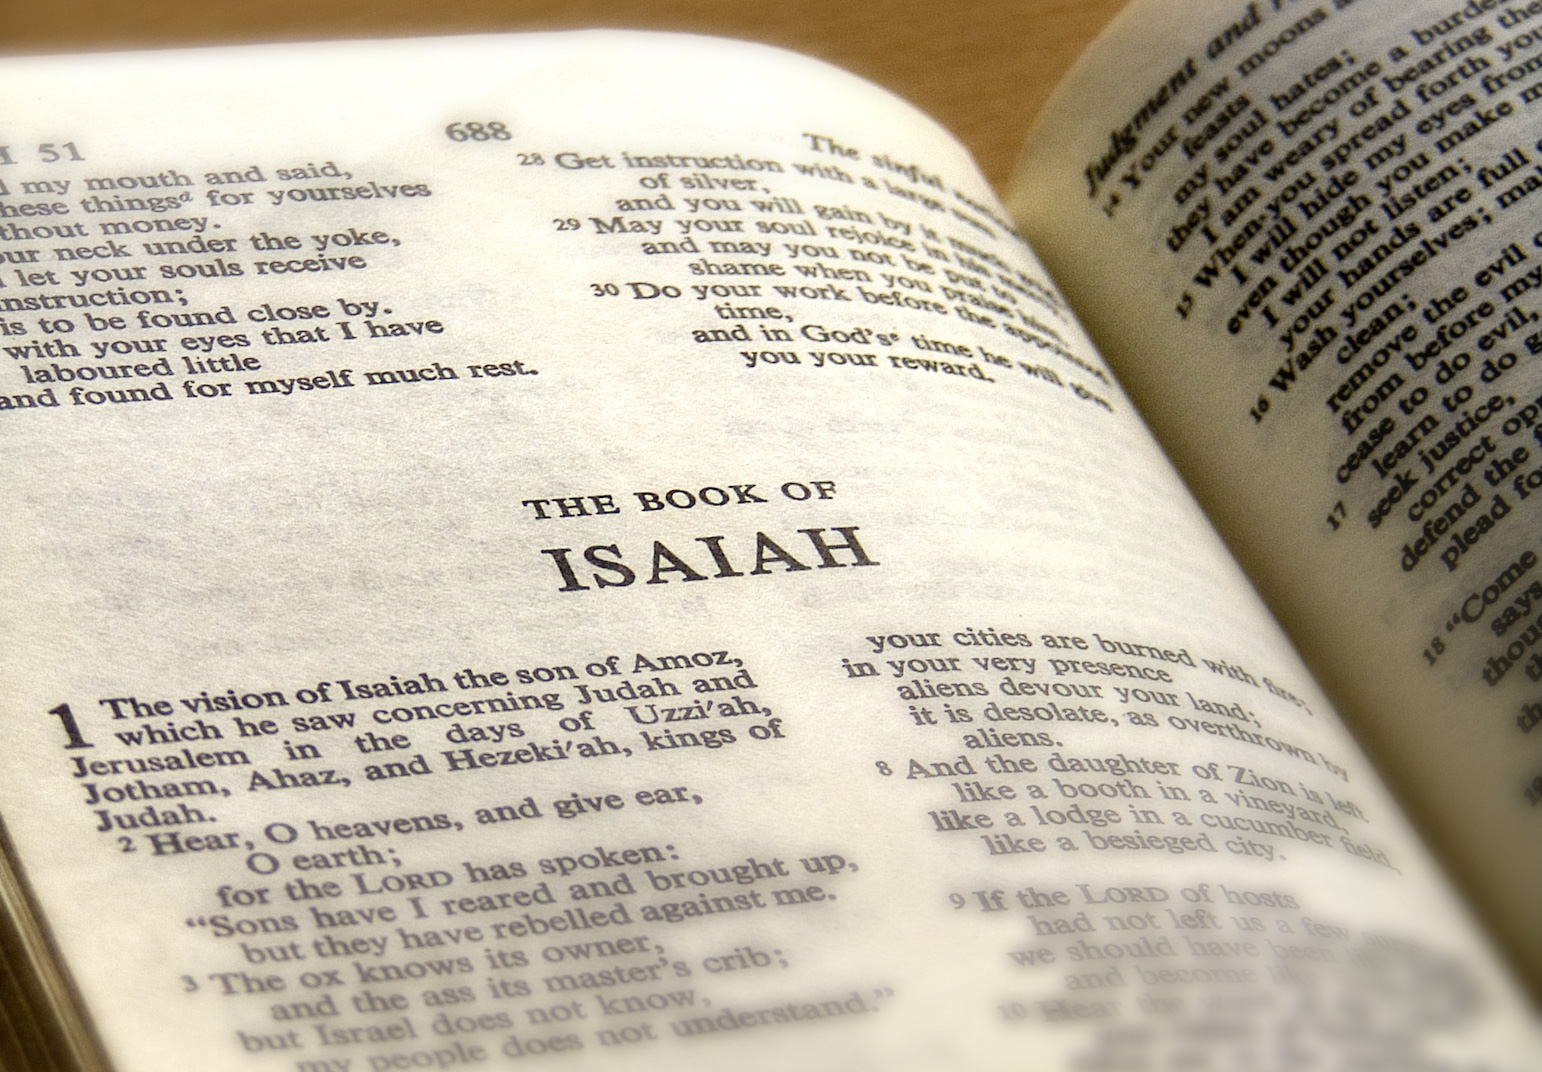 The rabbis only applied Isaiah 52:13–15, not 53:1–12, to the Messiah son of David.